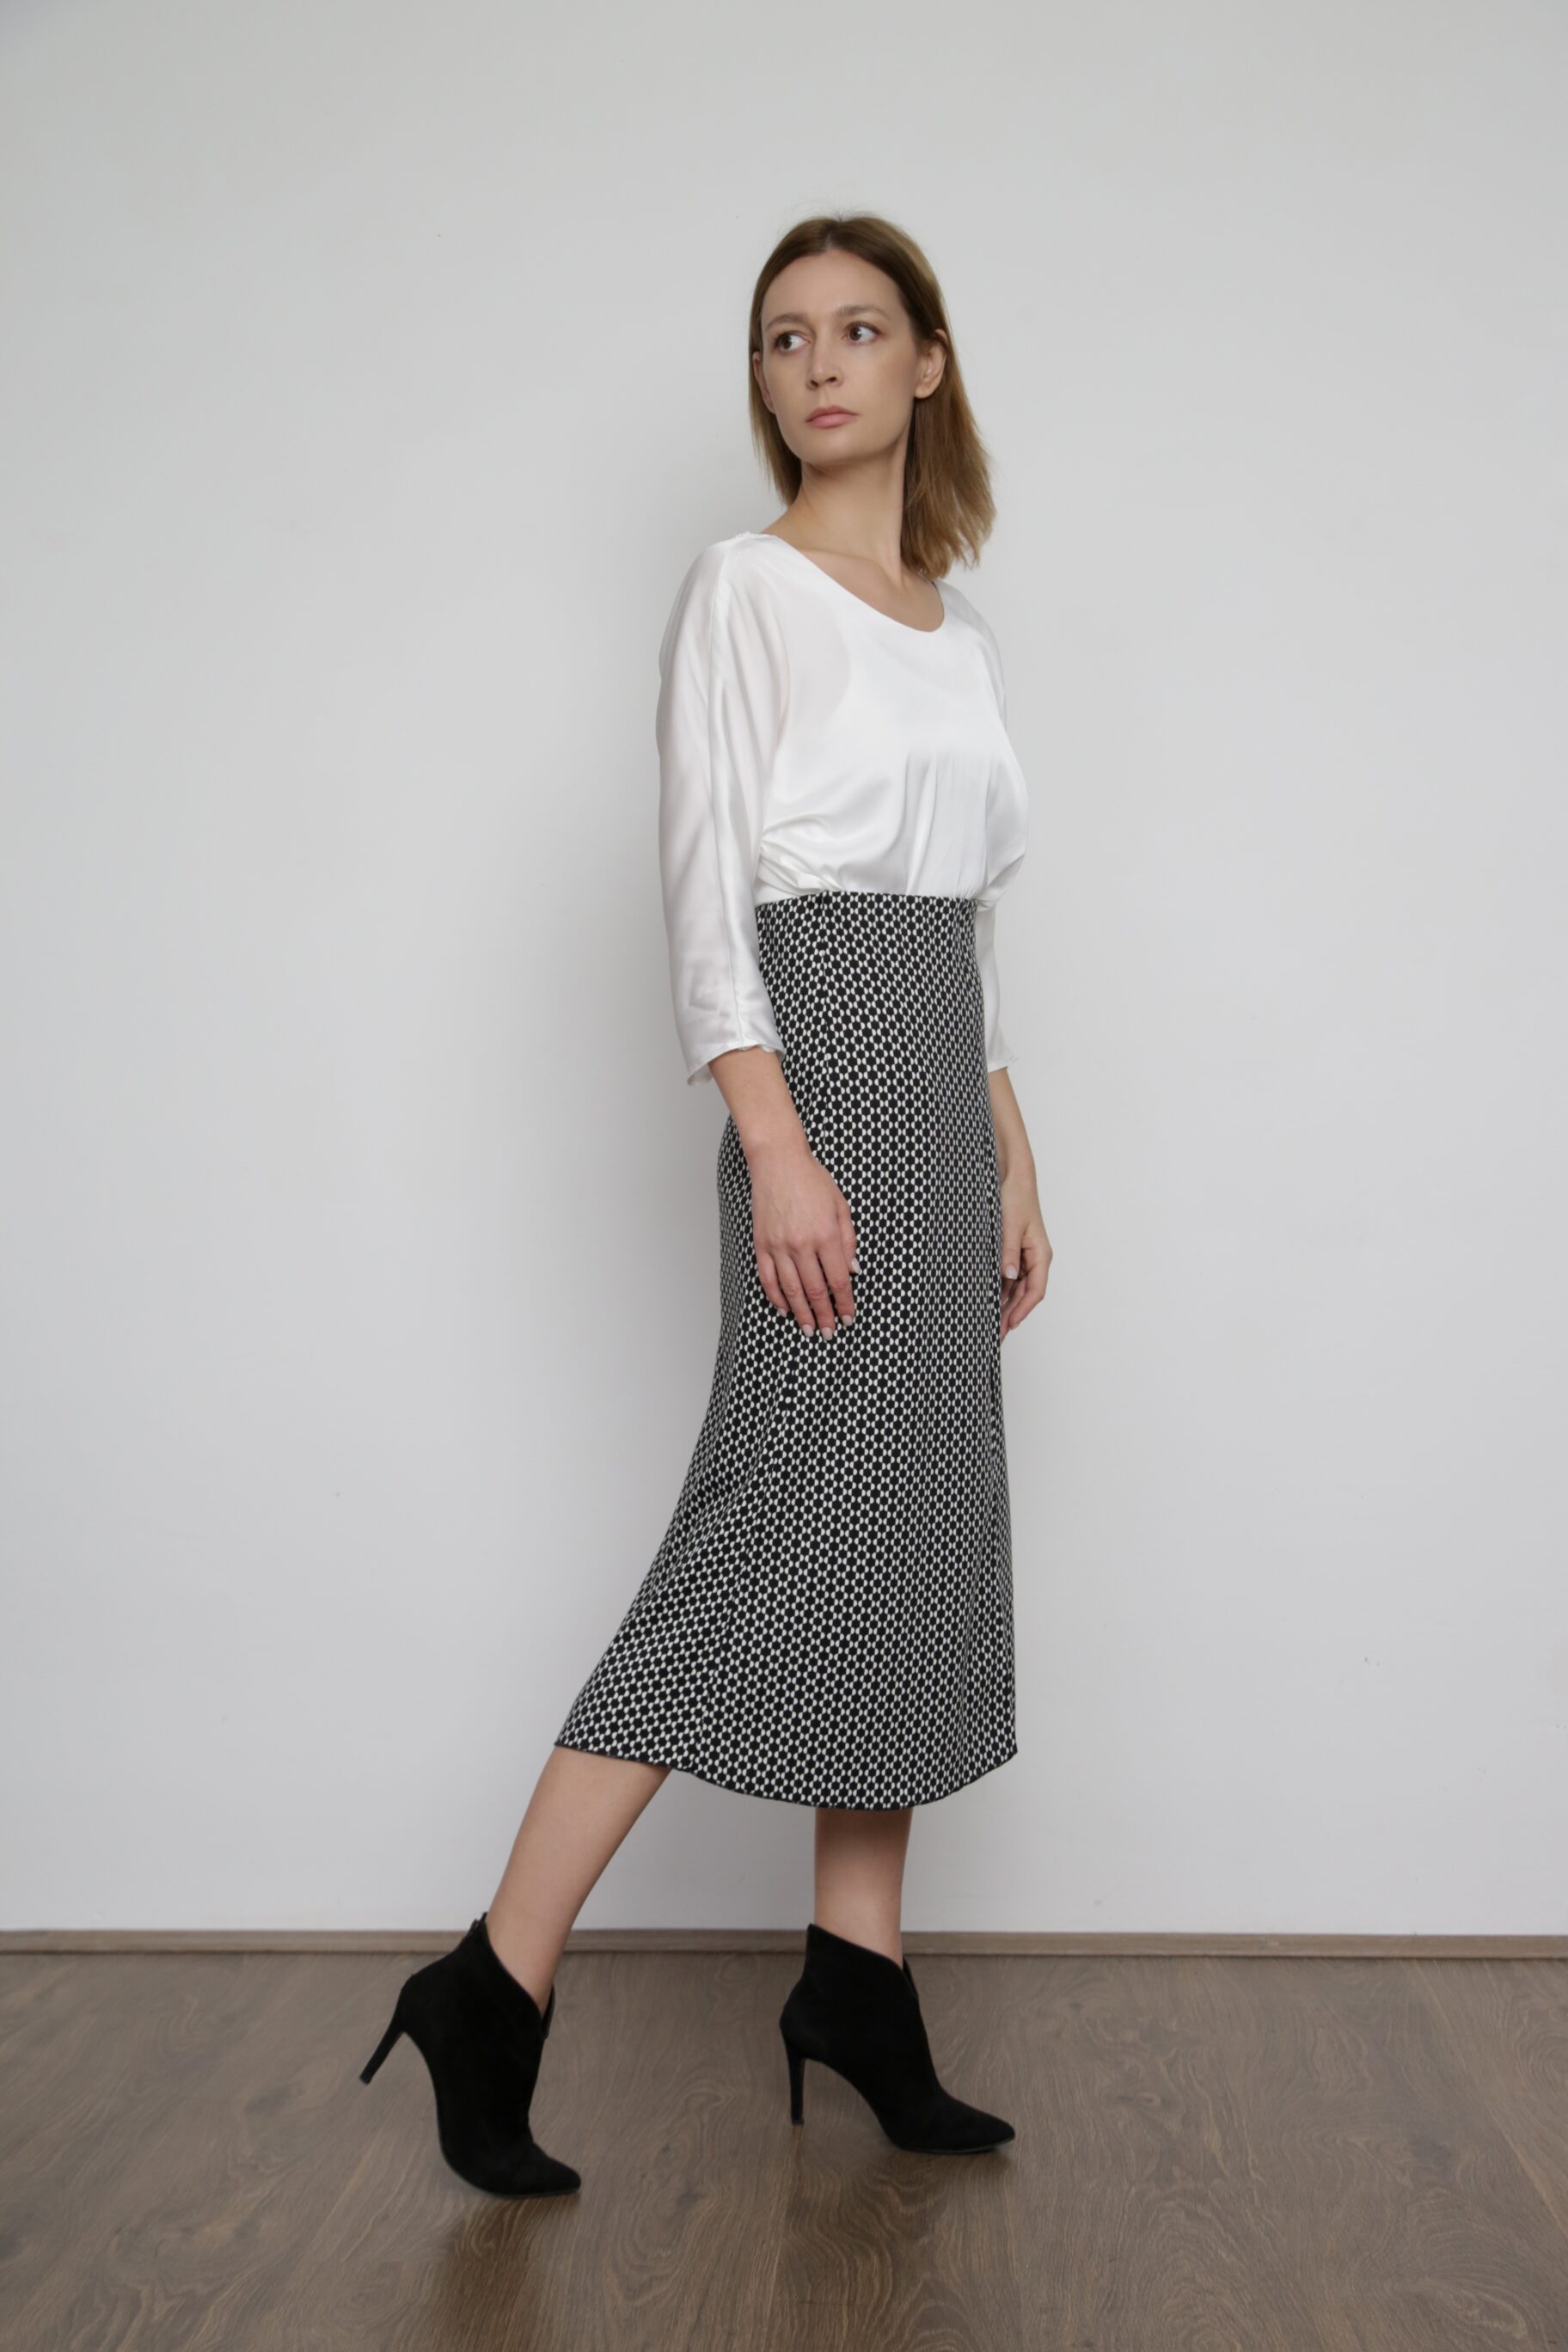 A White Silk Blouse With A Black Midi Skirt And Black Ankle Boots